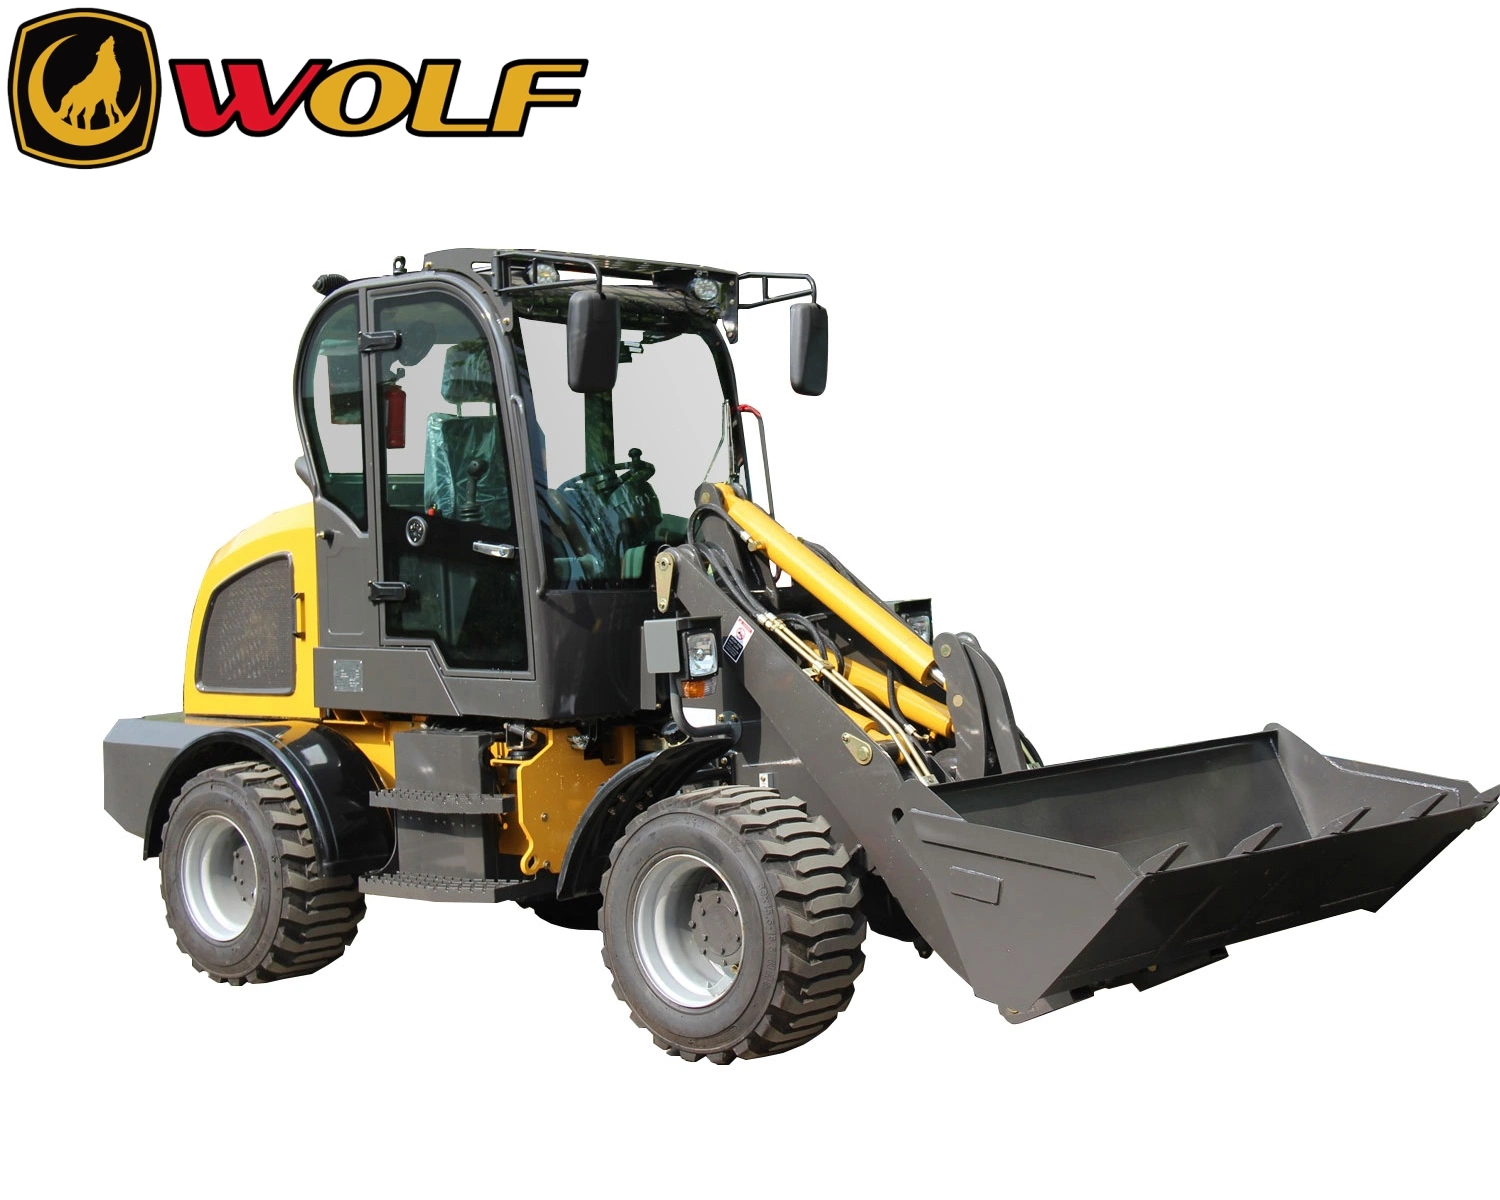 Wolf New Designed Wl816 Wheel Loader for Contruction Company